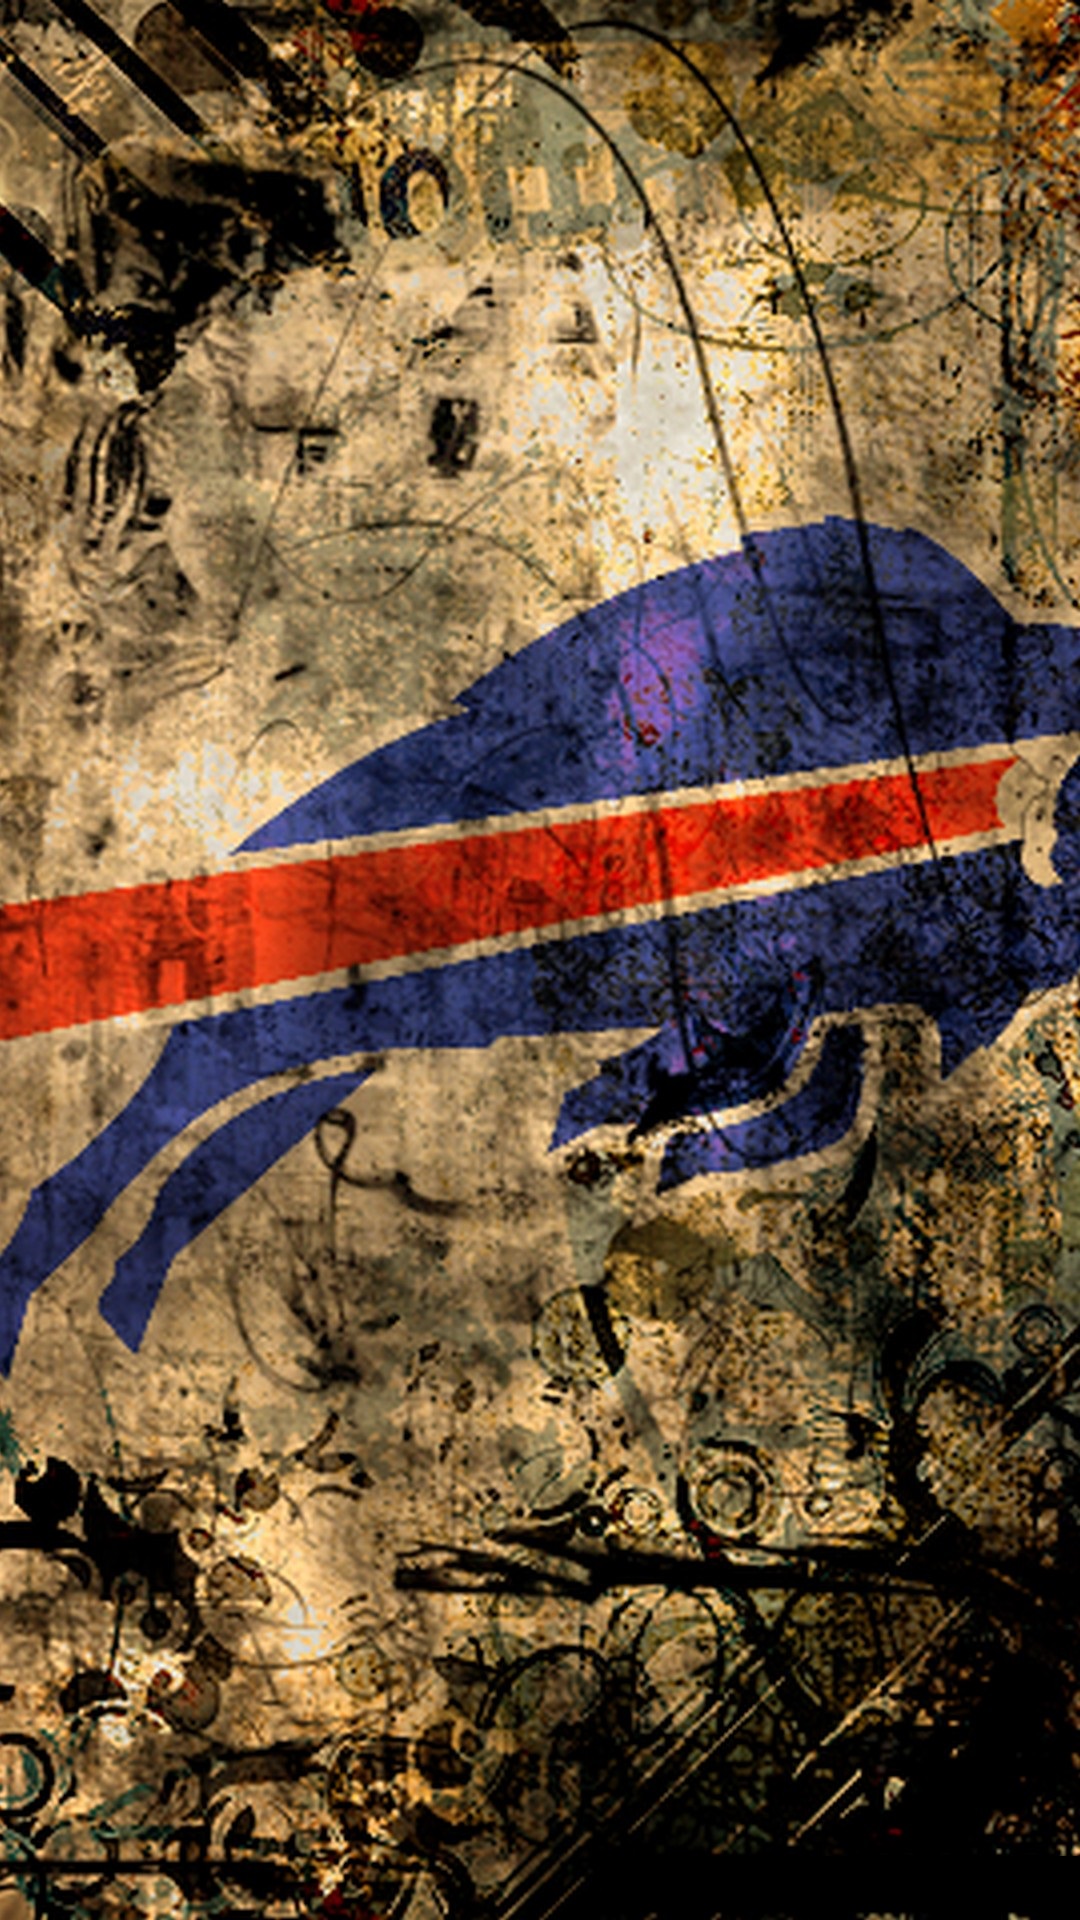 Buffalo Bills iPhone Wallpaper Design With high-resolution 1080X1920 pixel. Download and set as wallpaper for Apple iPhone X, XS Max, XR, 8, 7, 6, SE, iPad, Android